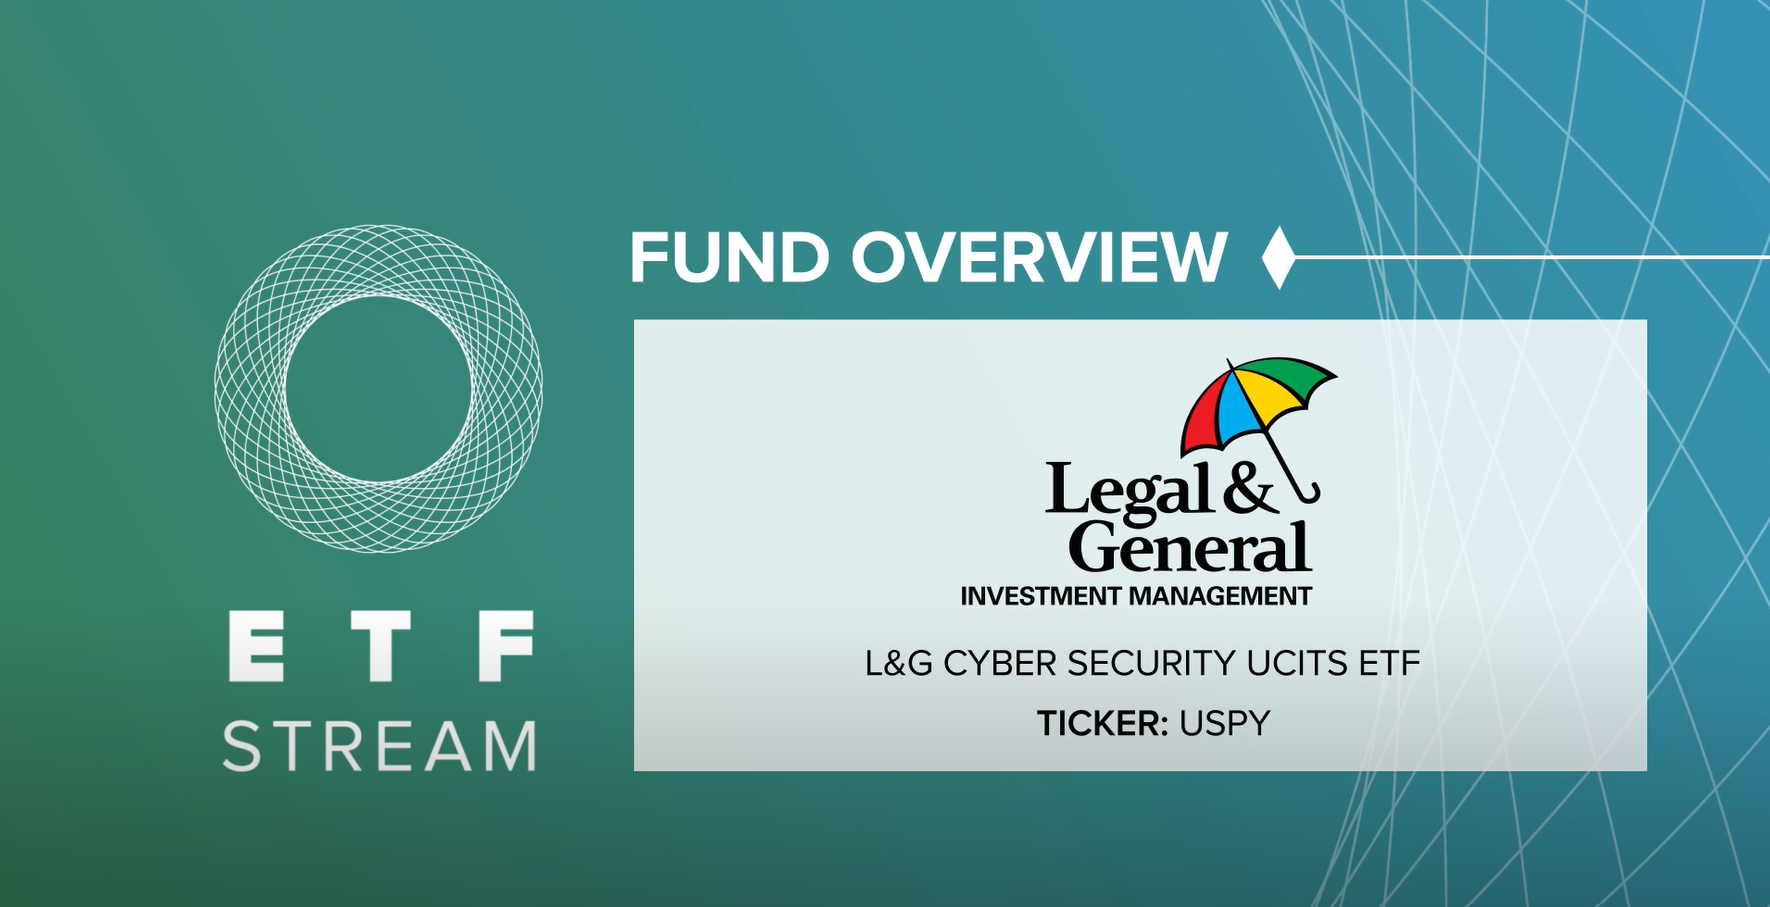 Fund Overview USPY Legal & General Cyber Security UCITS ETF